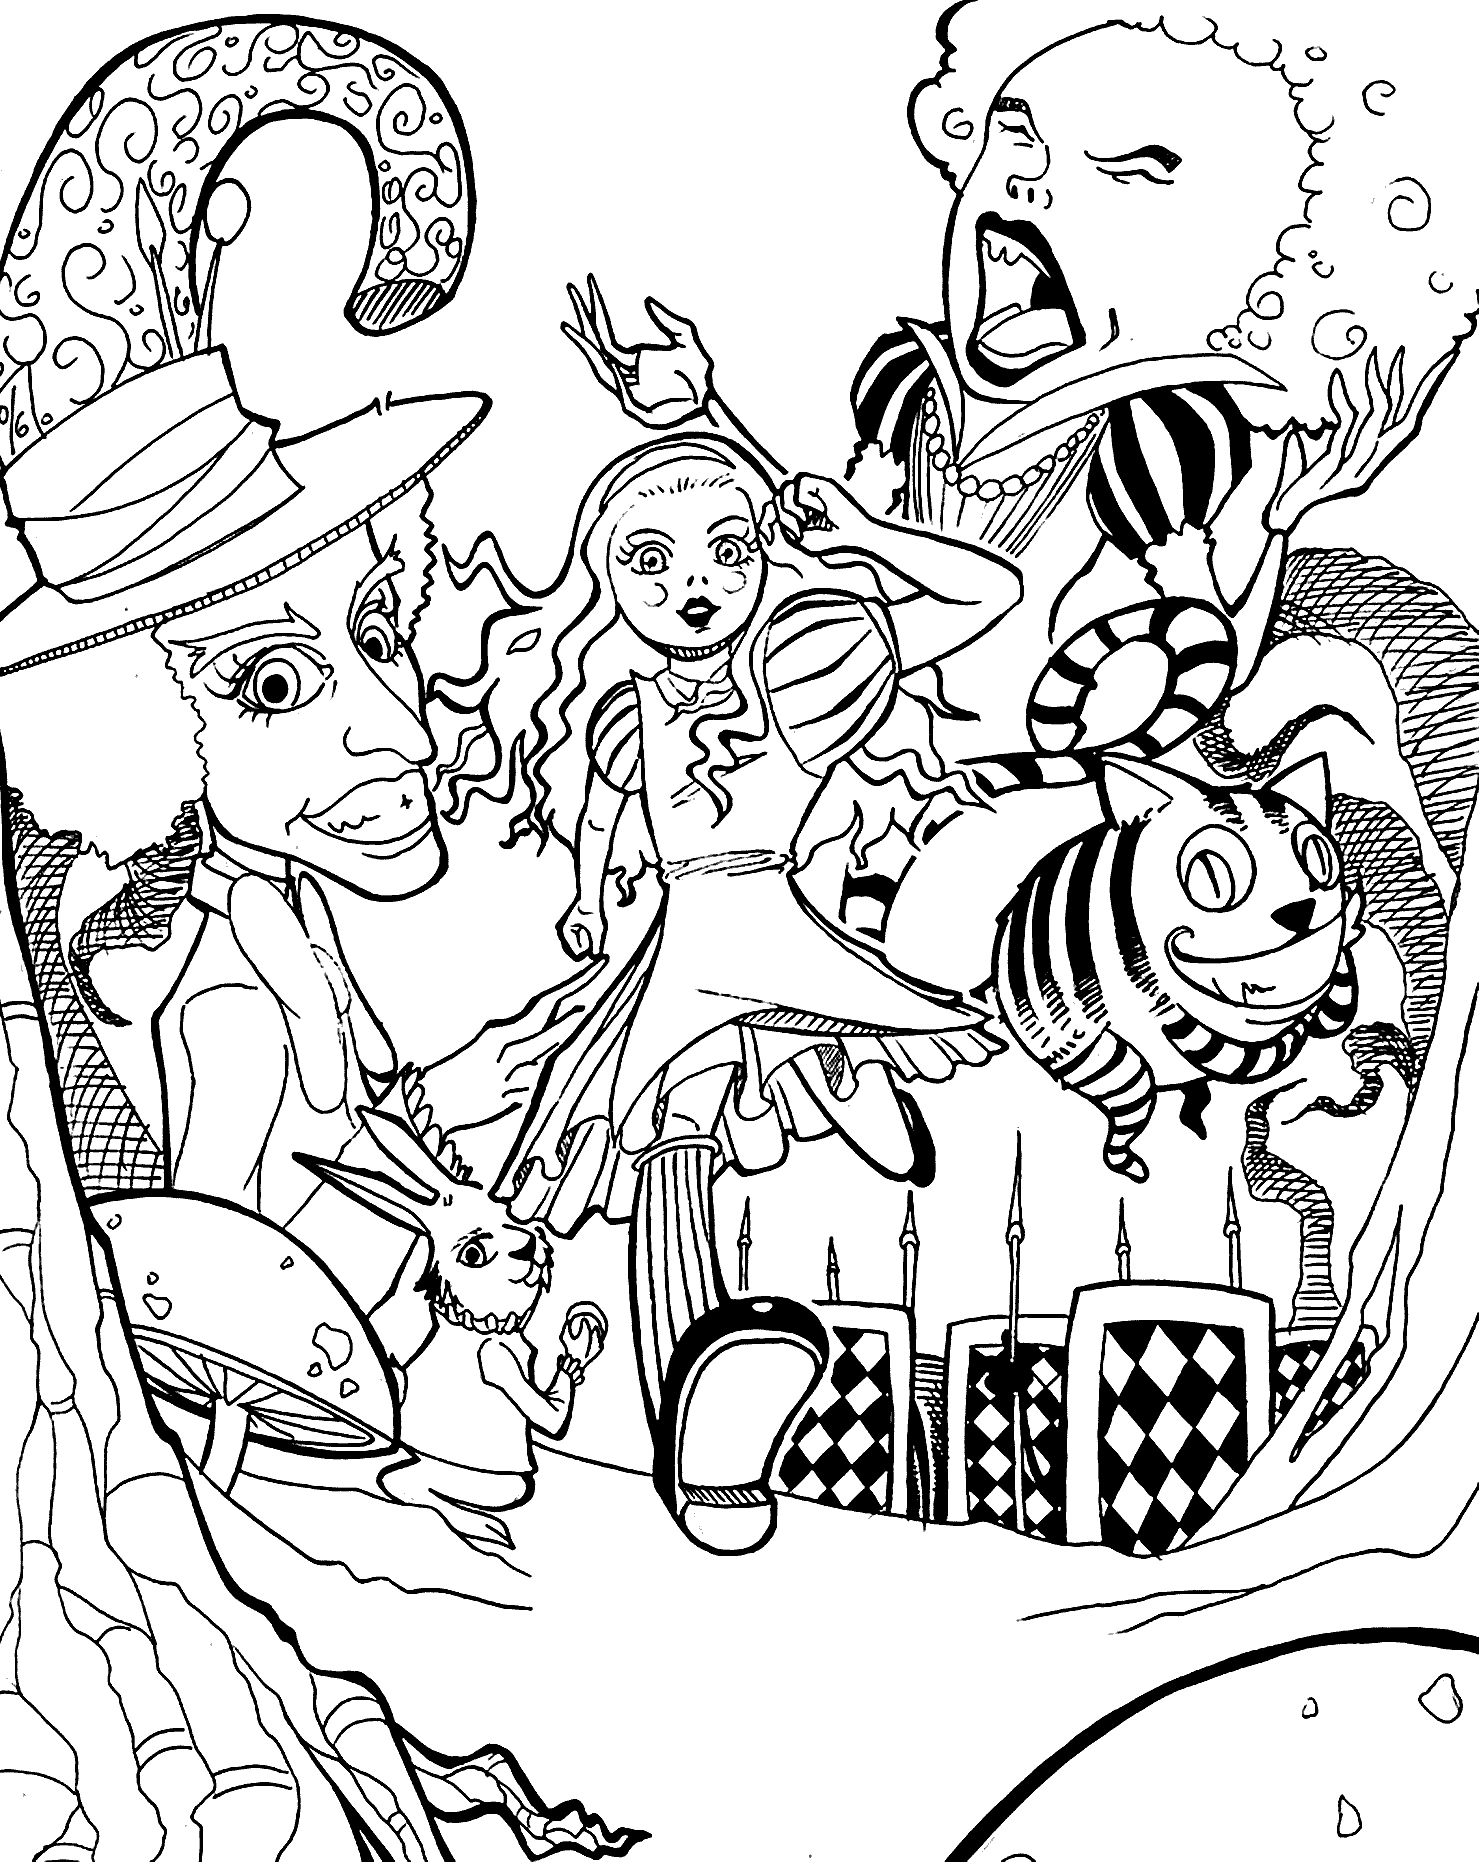 Trippy alice in wonderland coloring pages